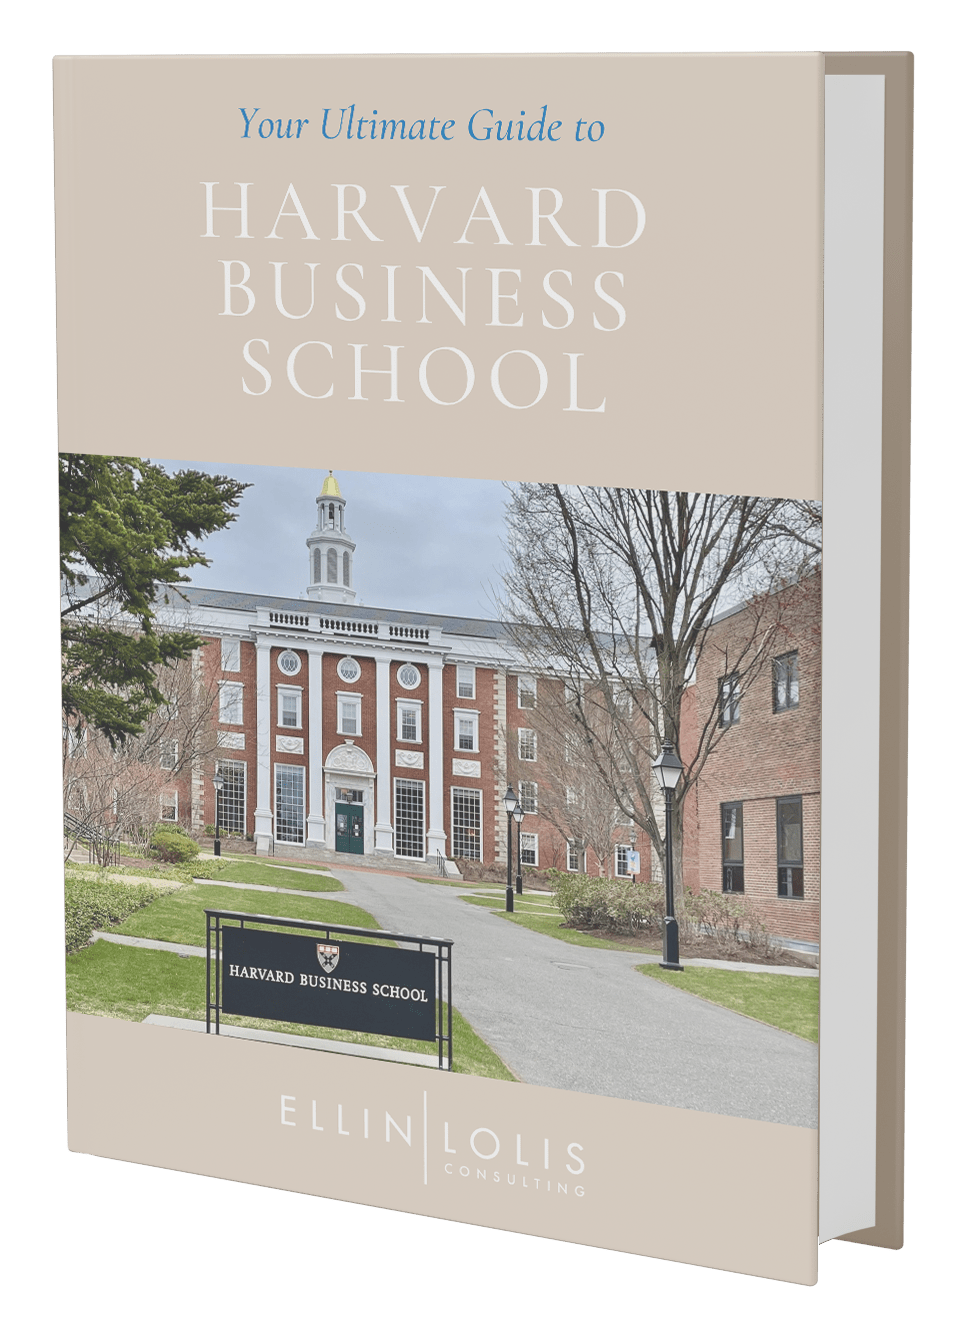 Your Ultimate Guide to Harvard Business School